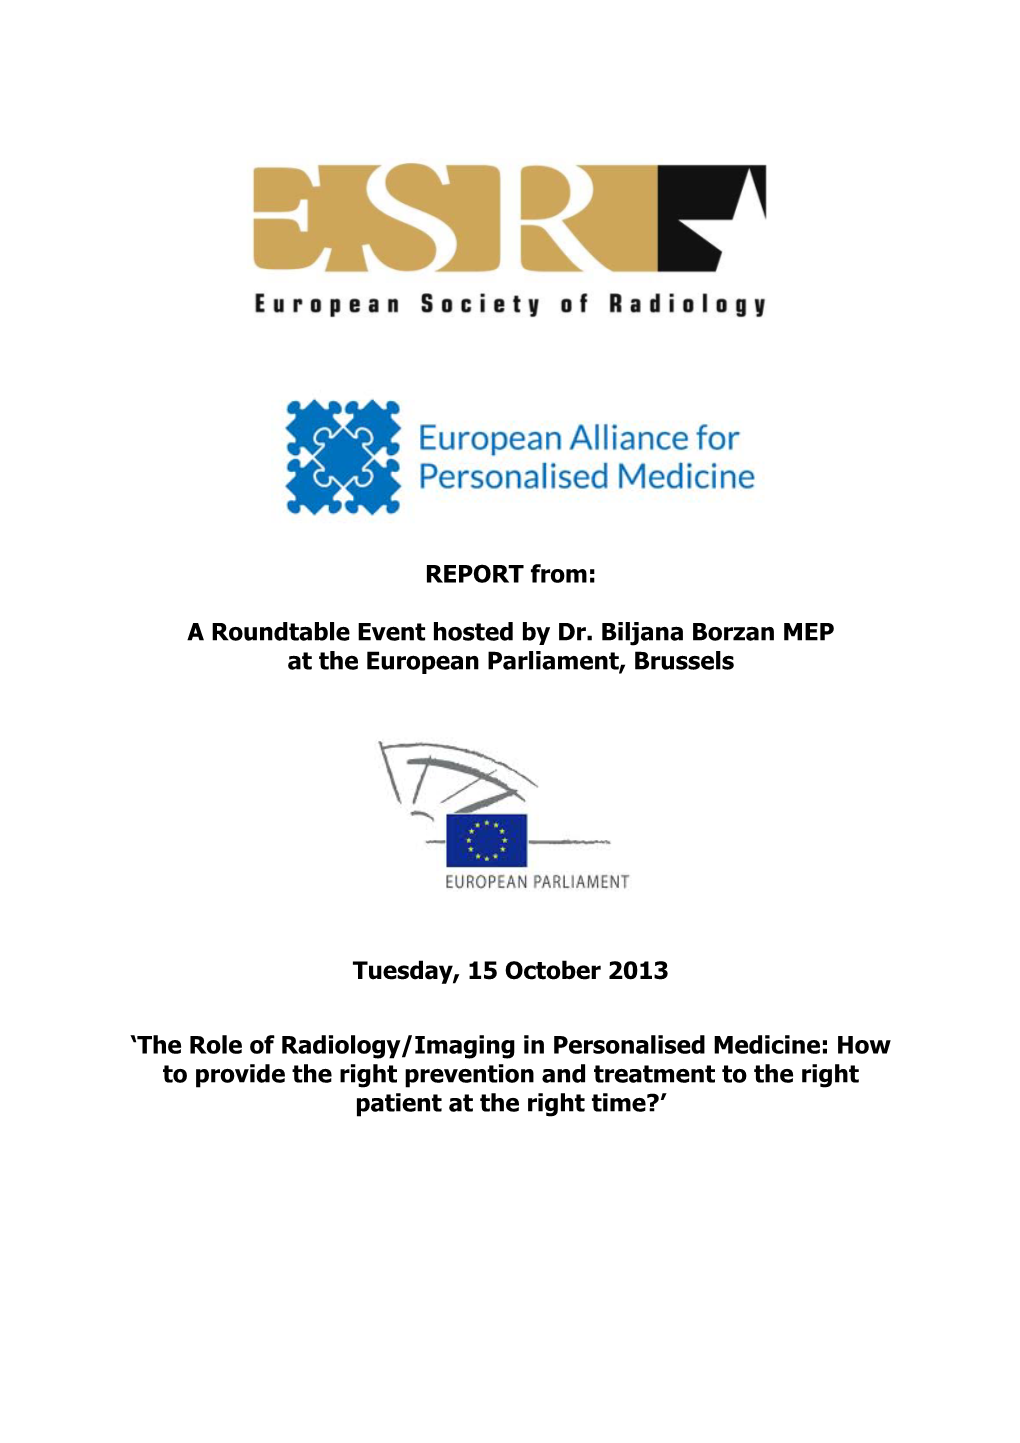 REPORT From: a Roundtable Event Hosted by Dr. Biljana Borzan MEP